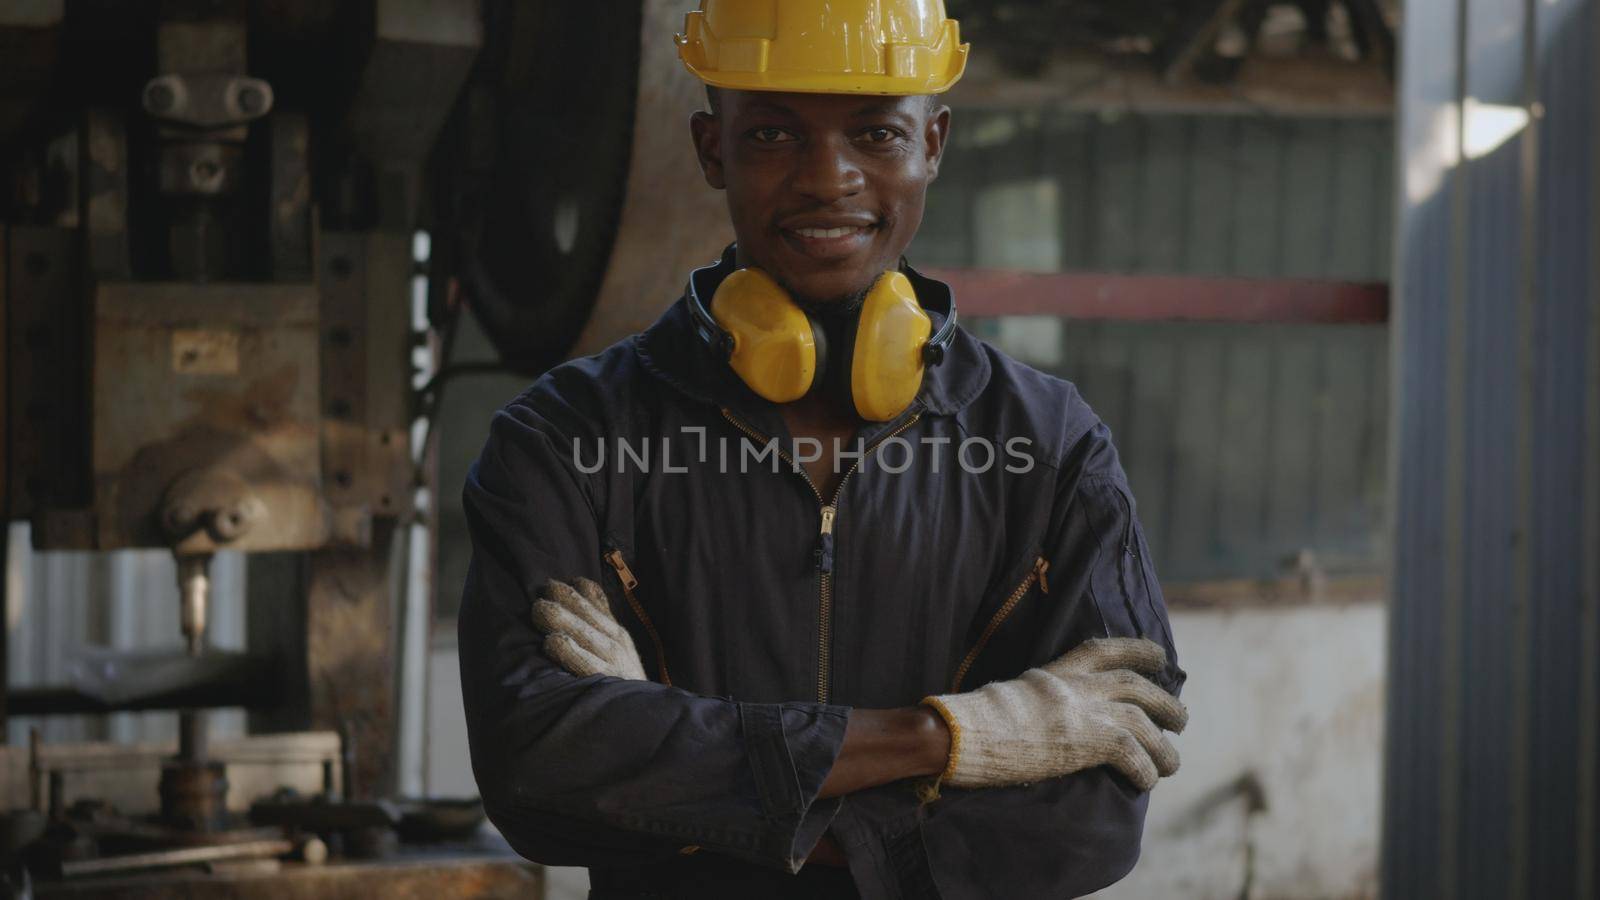 Portrait American industrial black young worker man smiling with yellow helmet in front of machine, Happy engineer standing arms crossed at work in the industry factory, manufacturing.